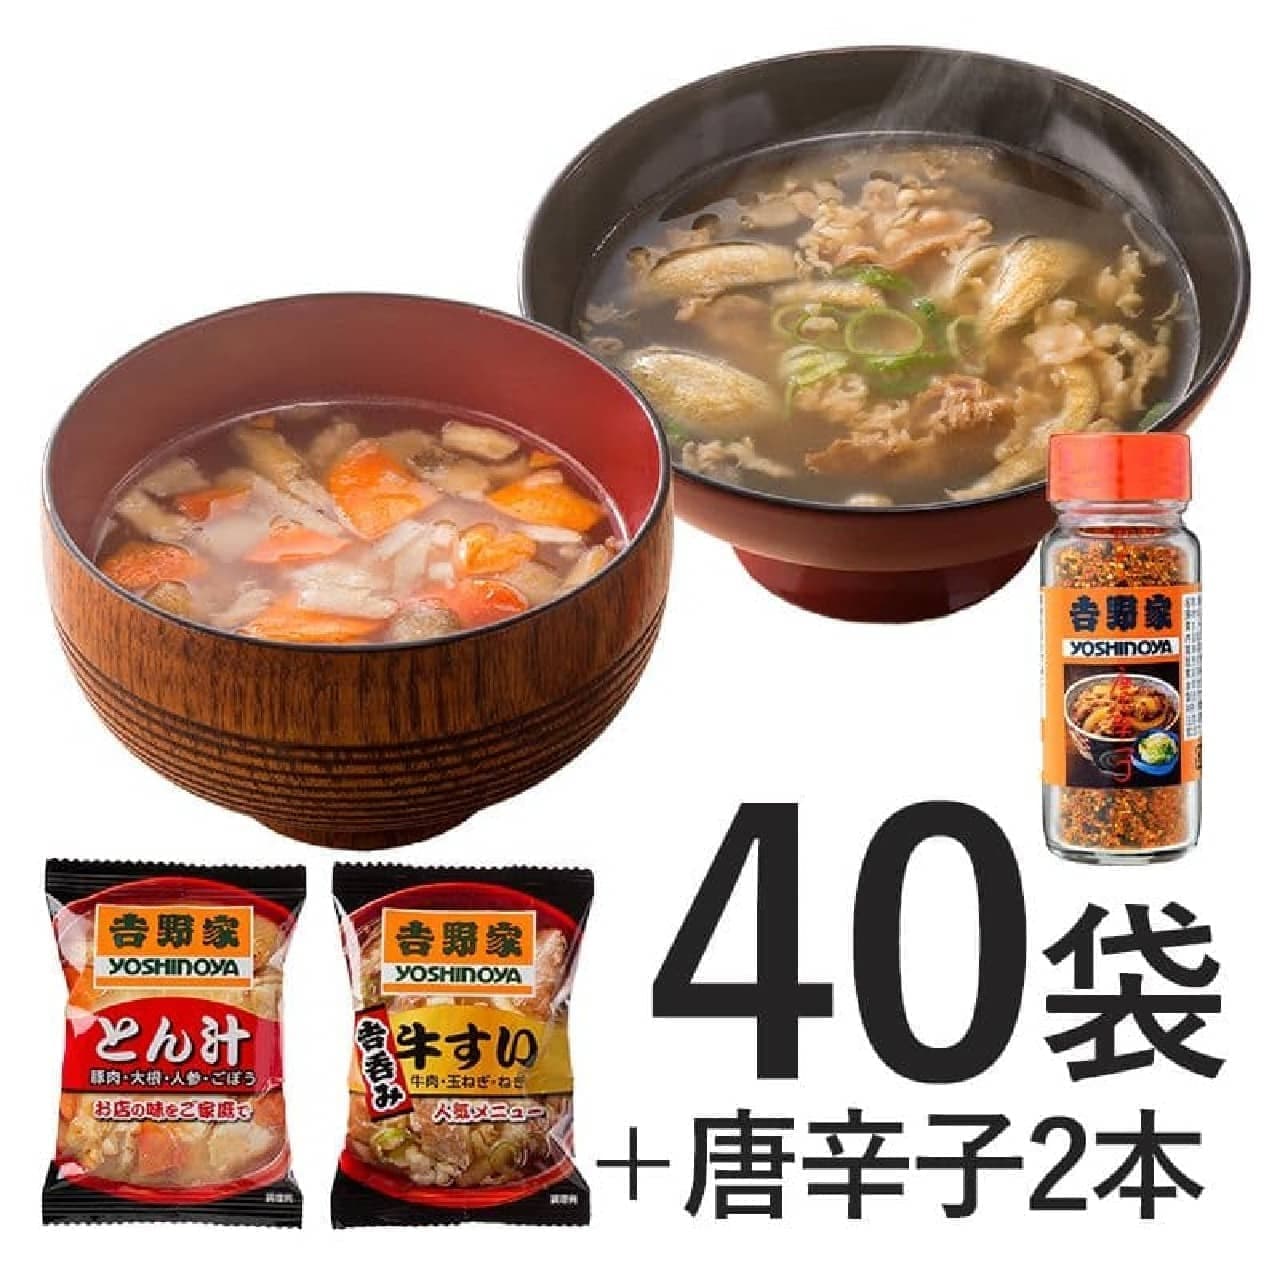 Yoshinoya's official mail order store "Pork miso soup, beef soup, chili pepper set".